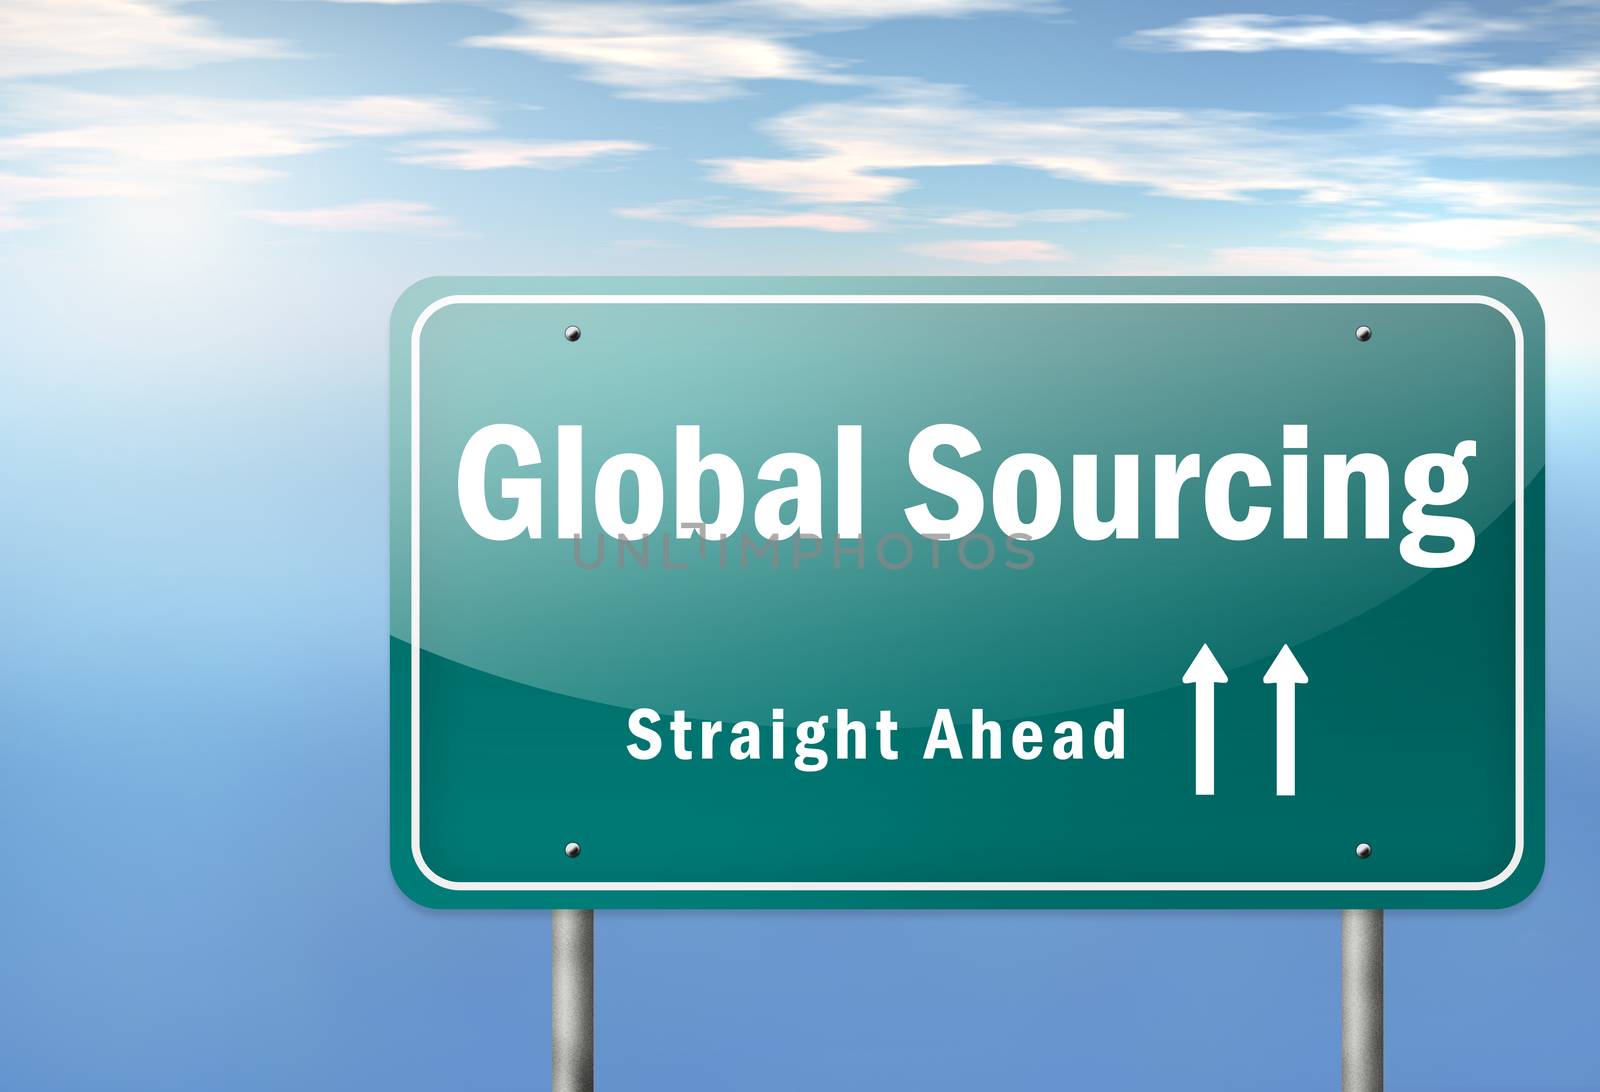 Highway Signpost with Global Sourcing wording